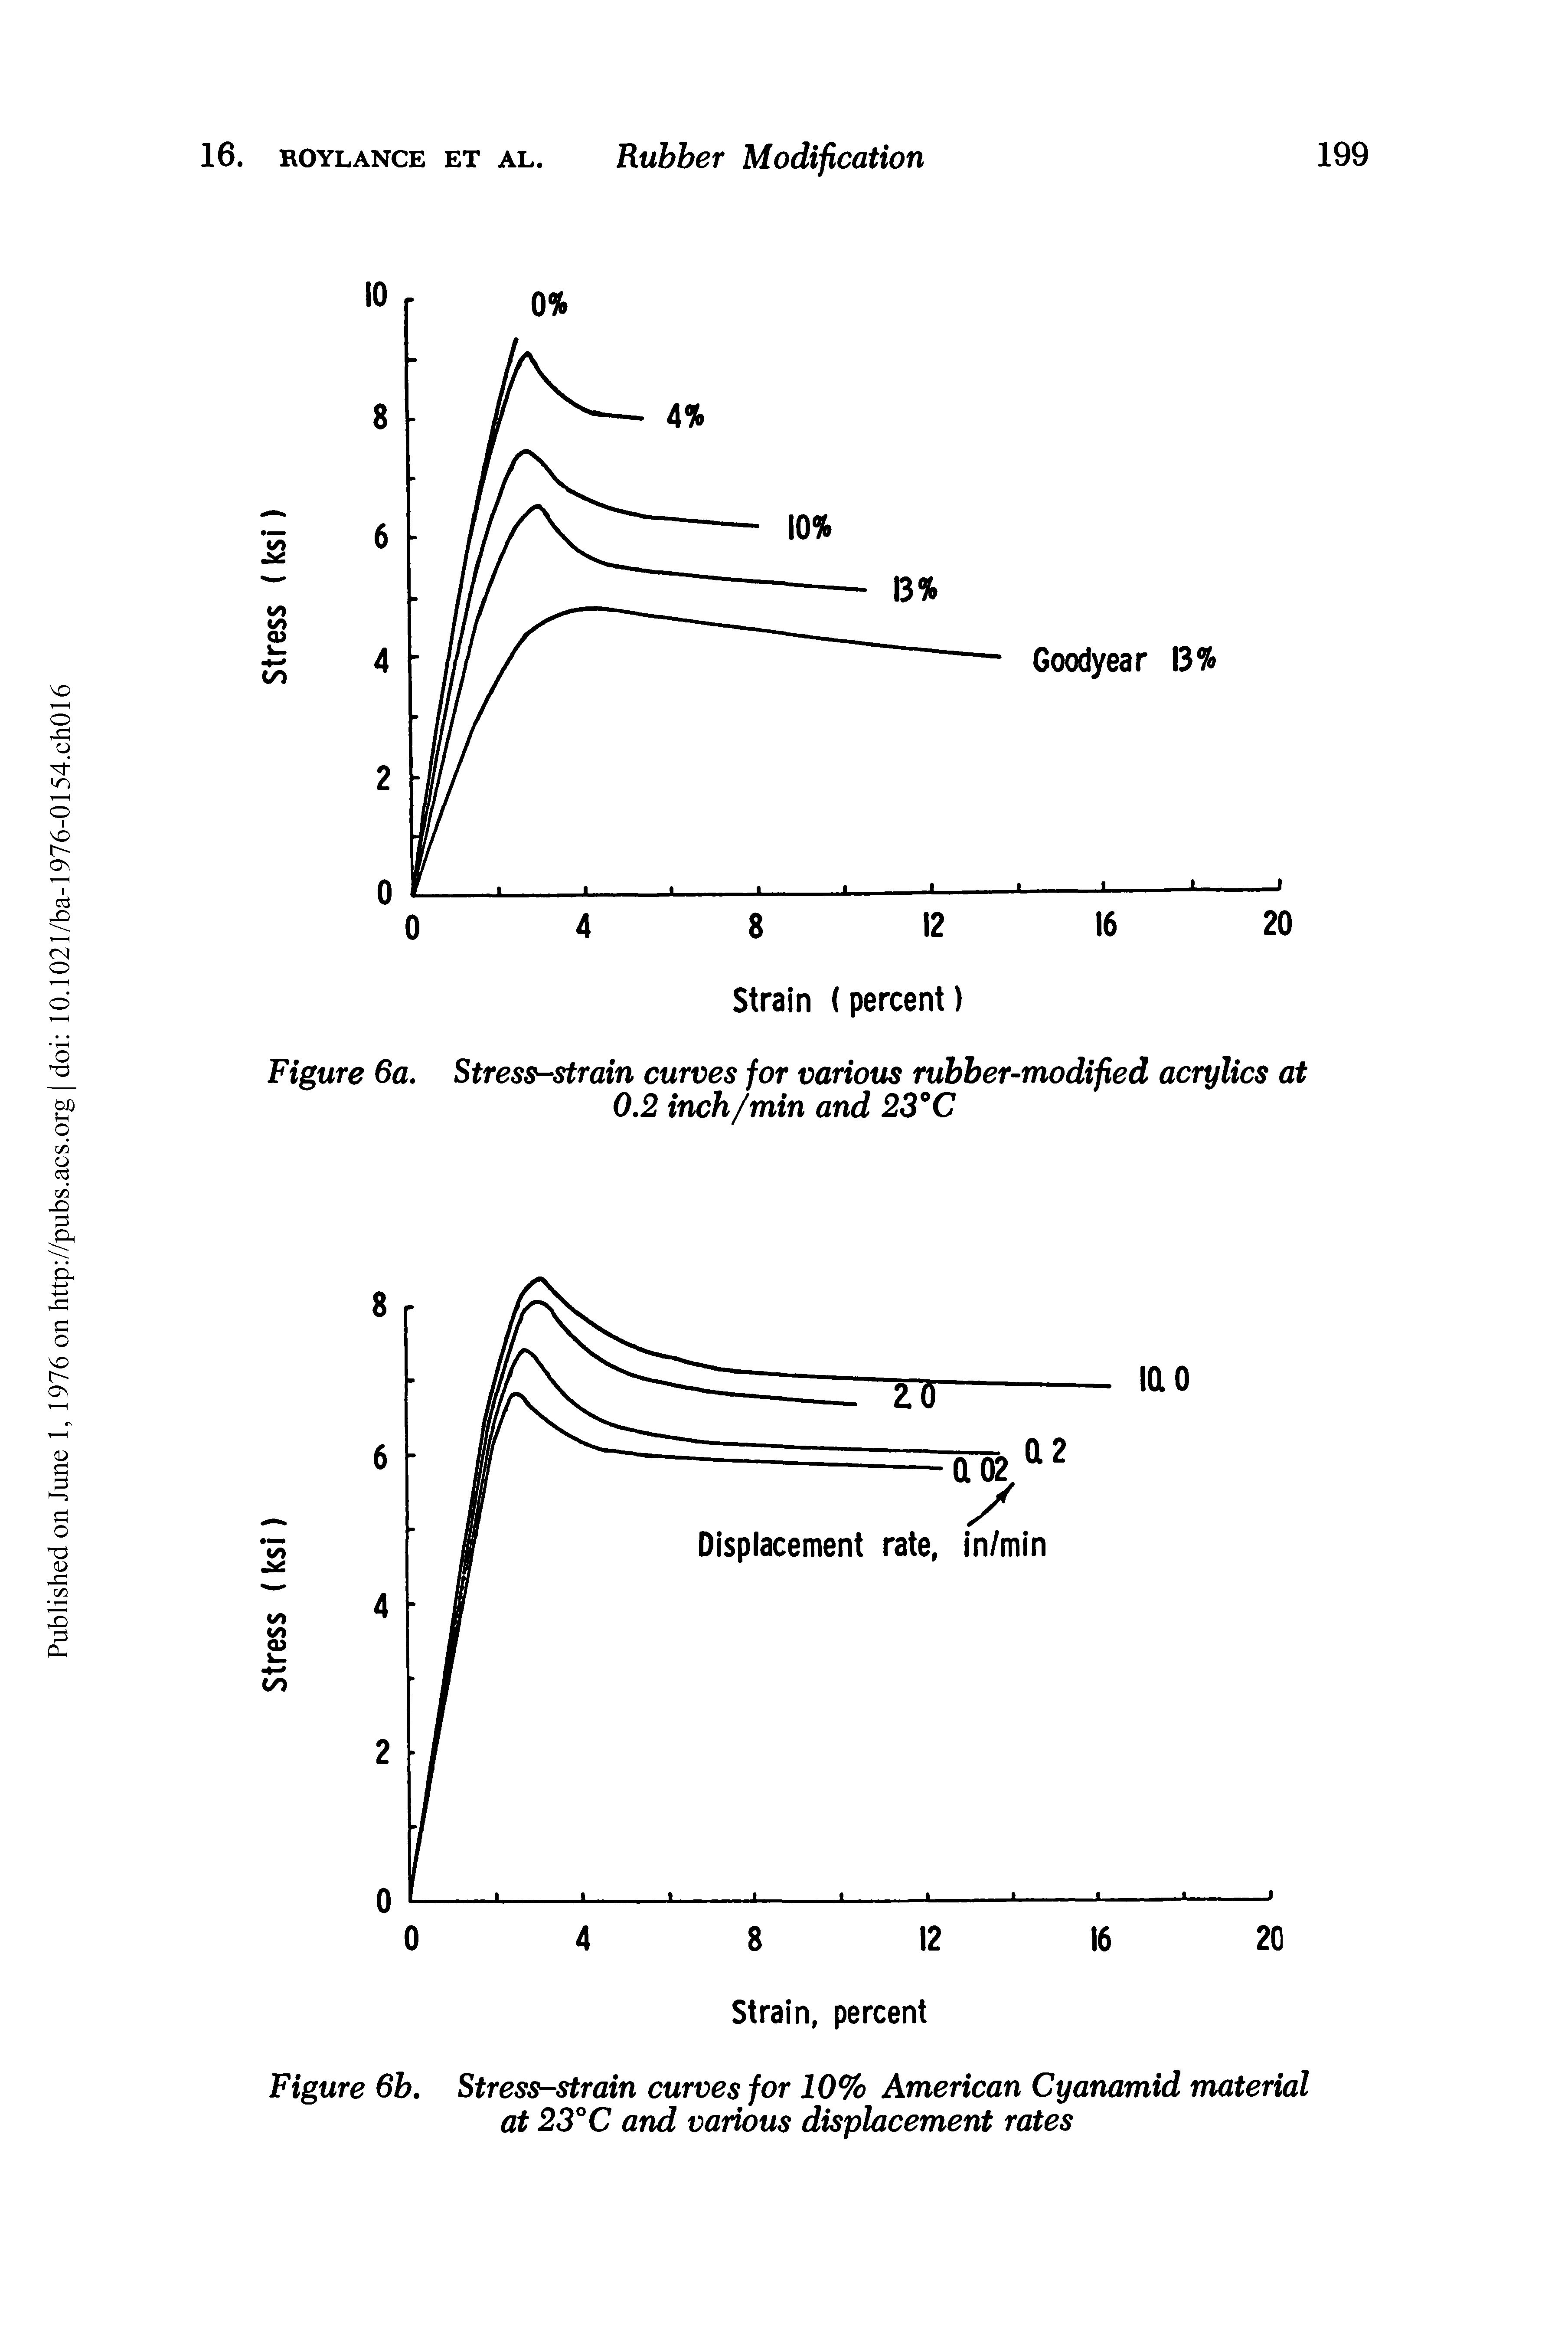 Figure 6a. Stress-strain curves for various rubber-modified acrylics at 0.2 inch/min and 23°C...